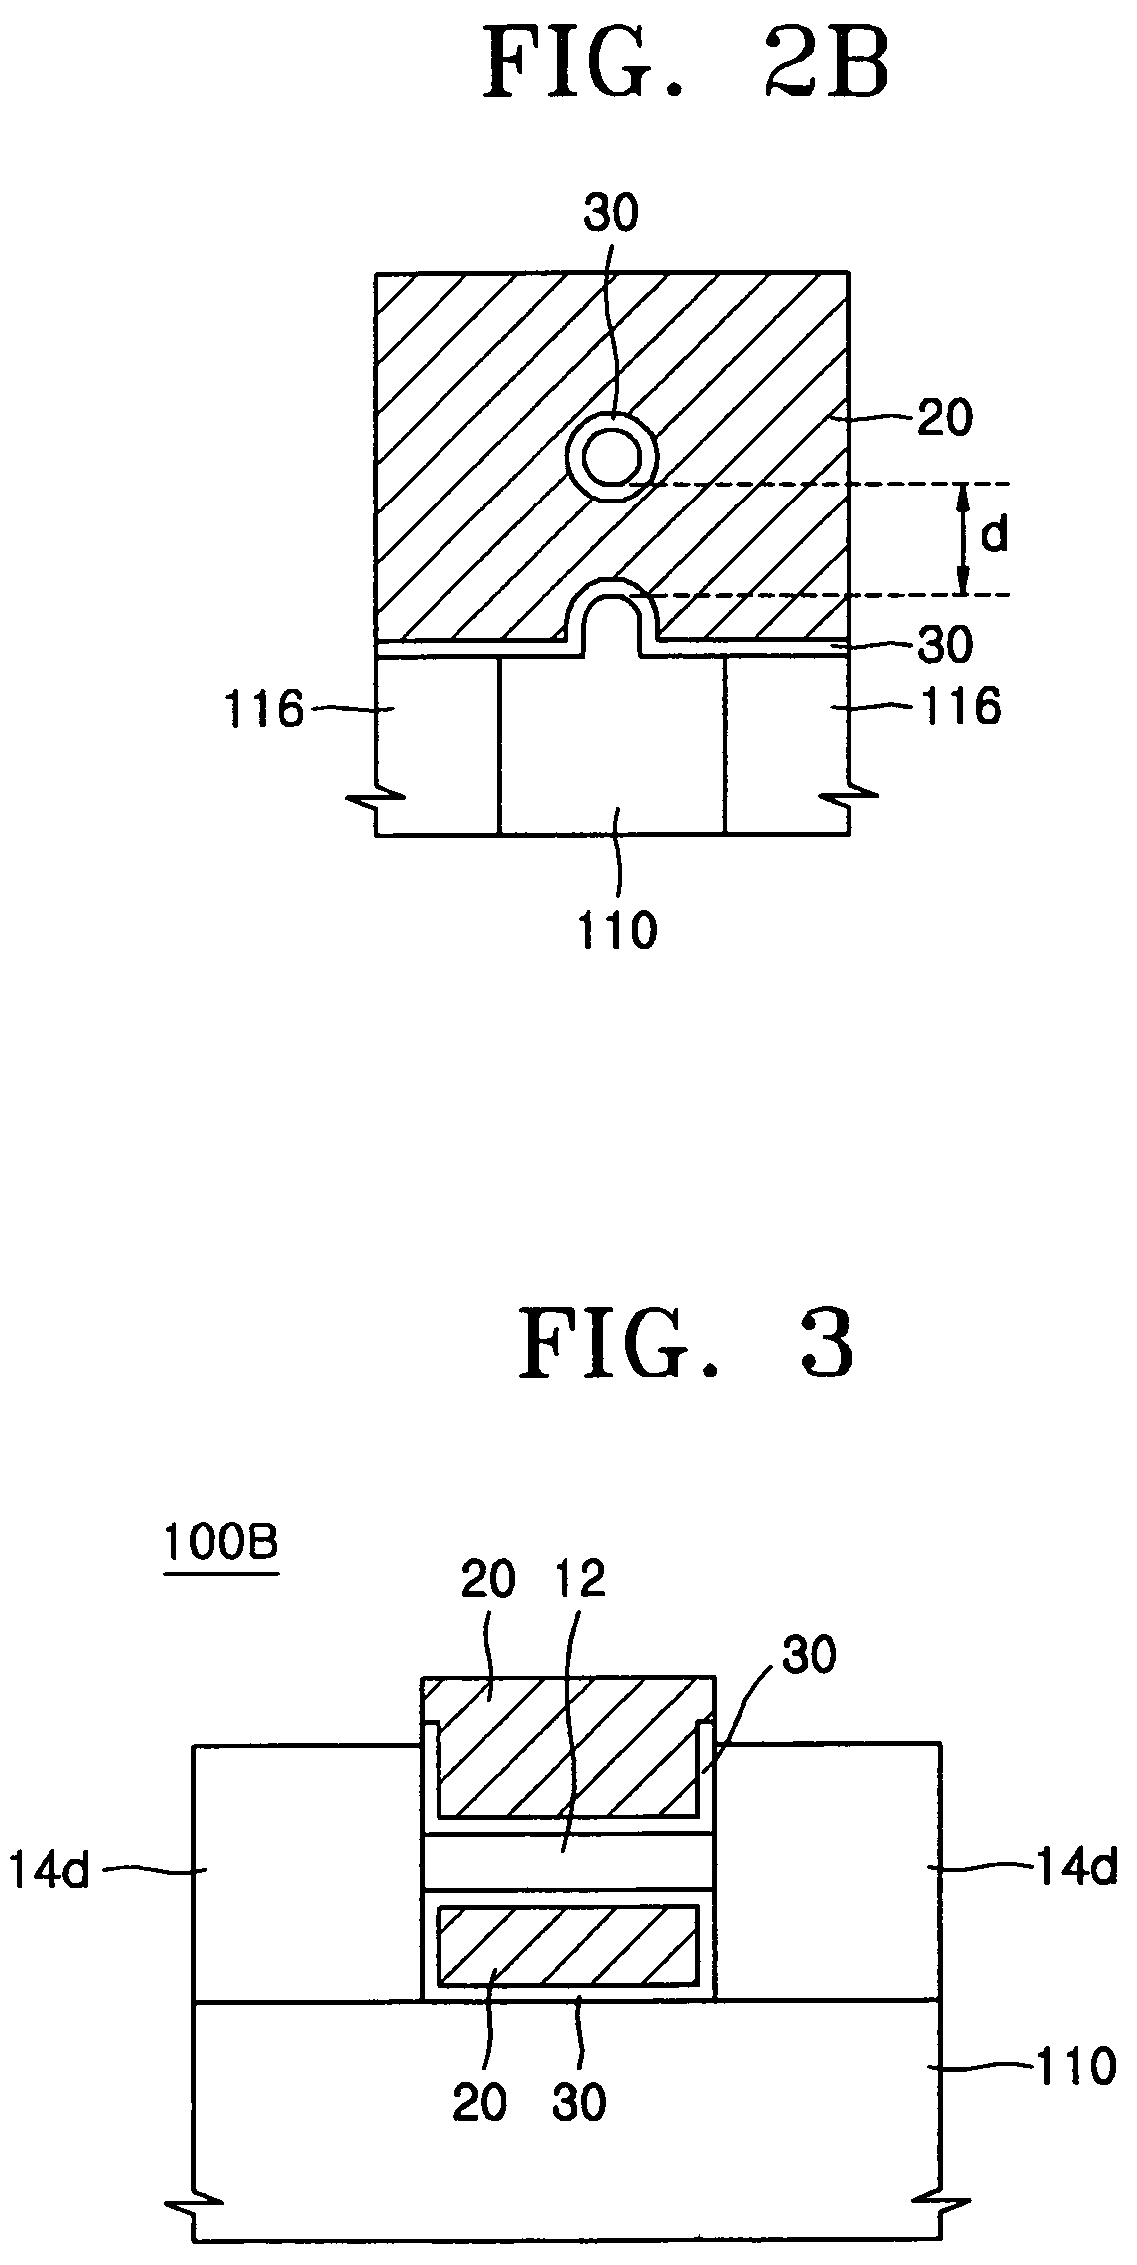 Semiconductor device having a round-shaped nano-wire transistor channel and method of manufacturing same